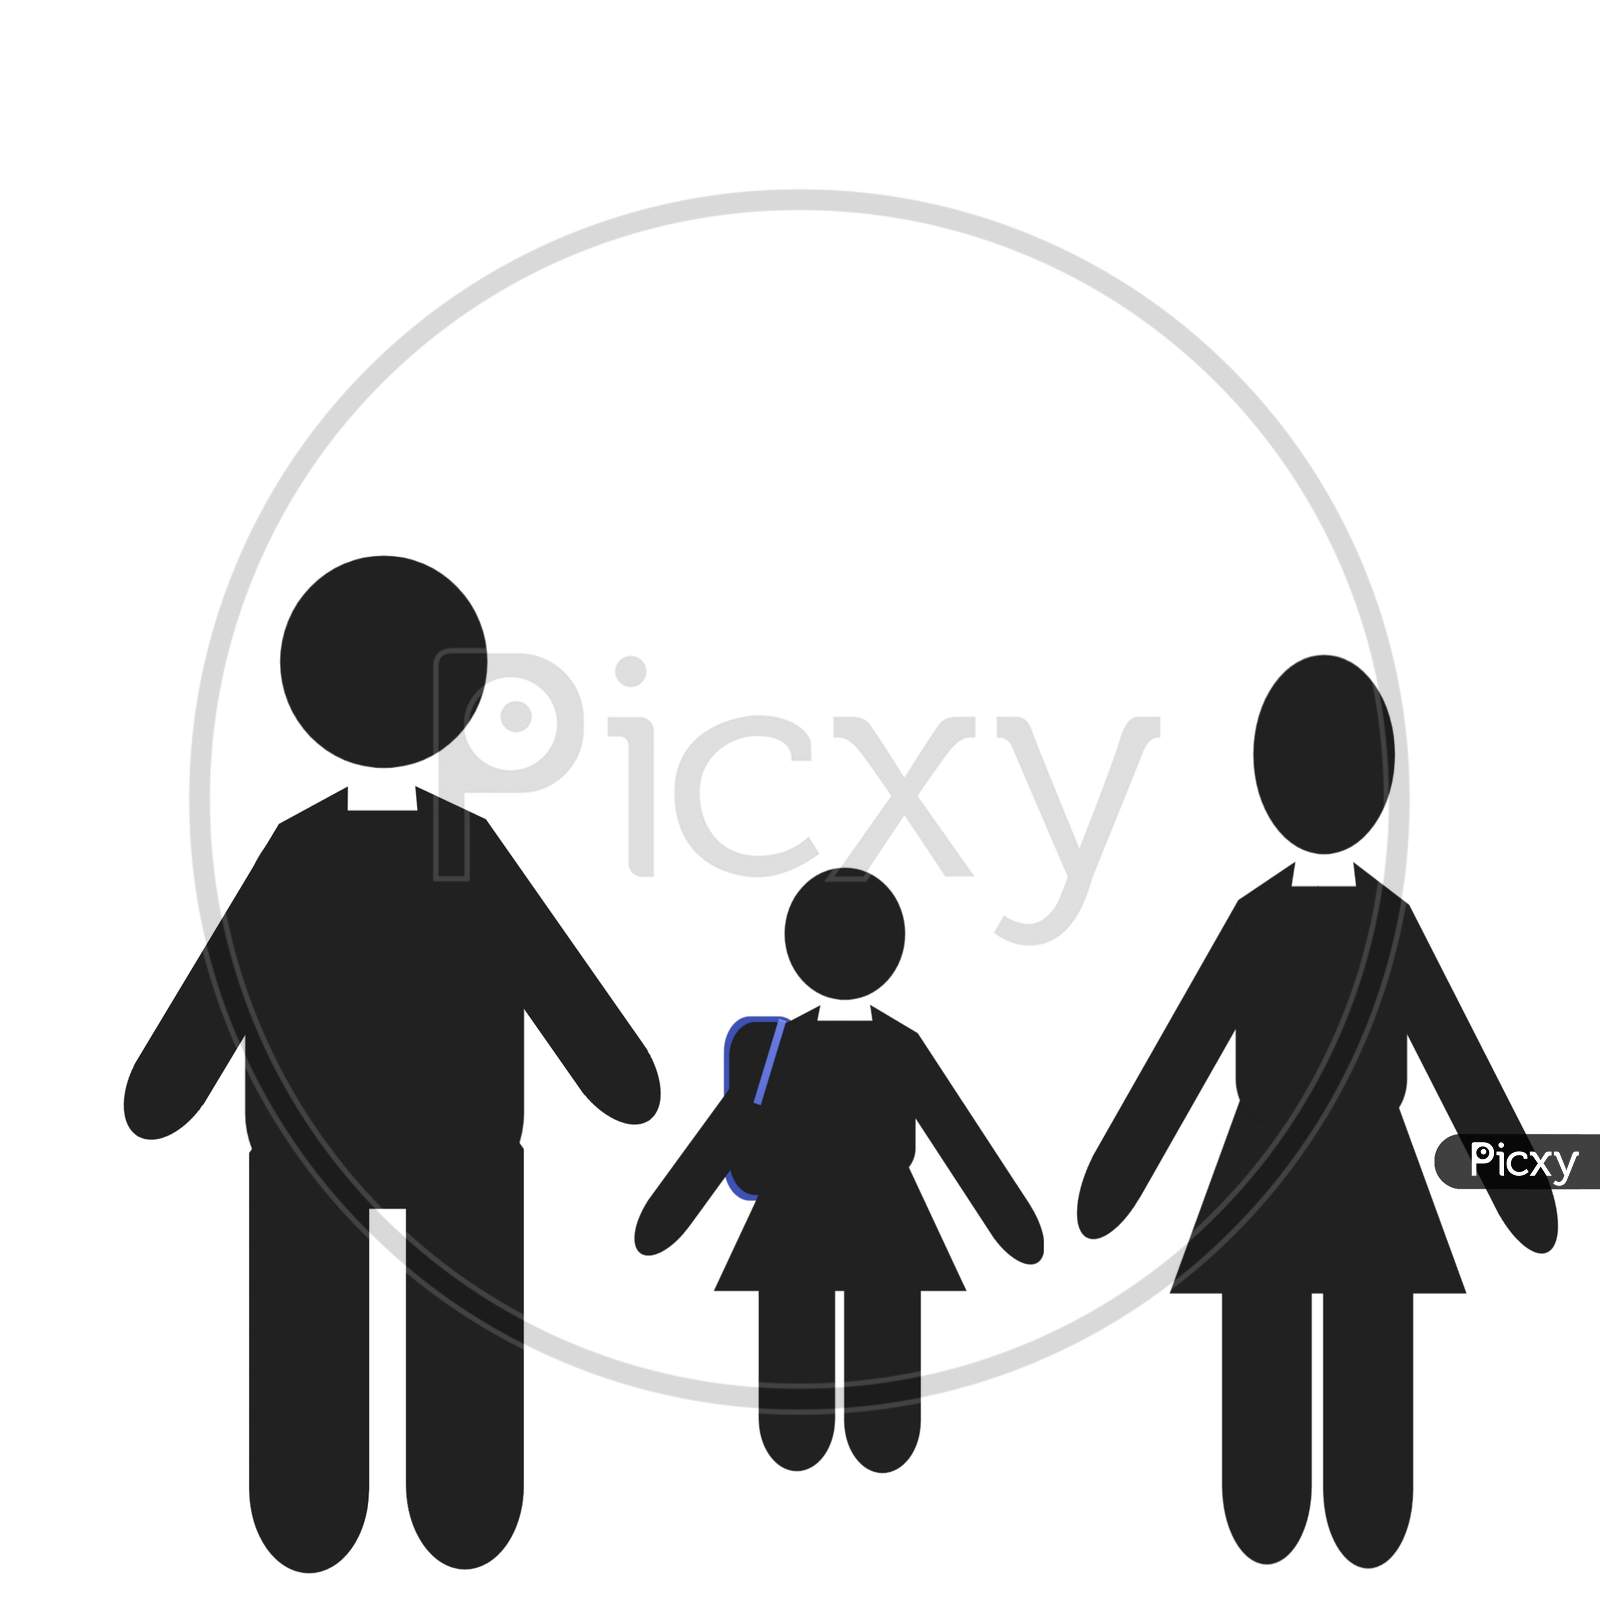 Clipart or icon of a small girl going to school with her parents